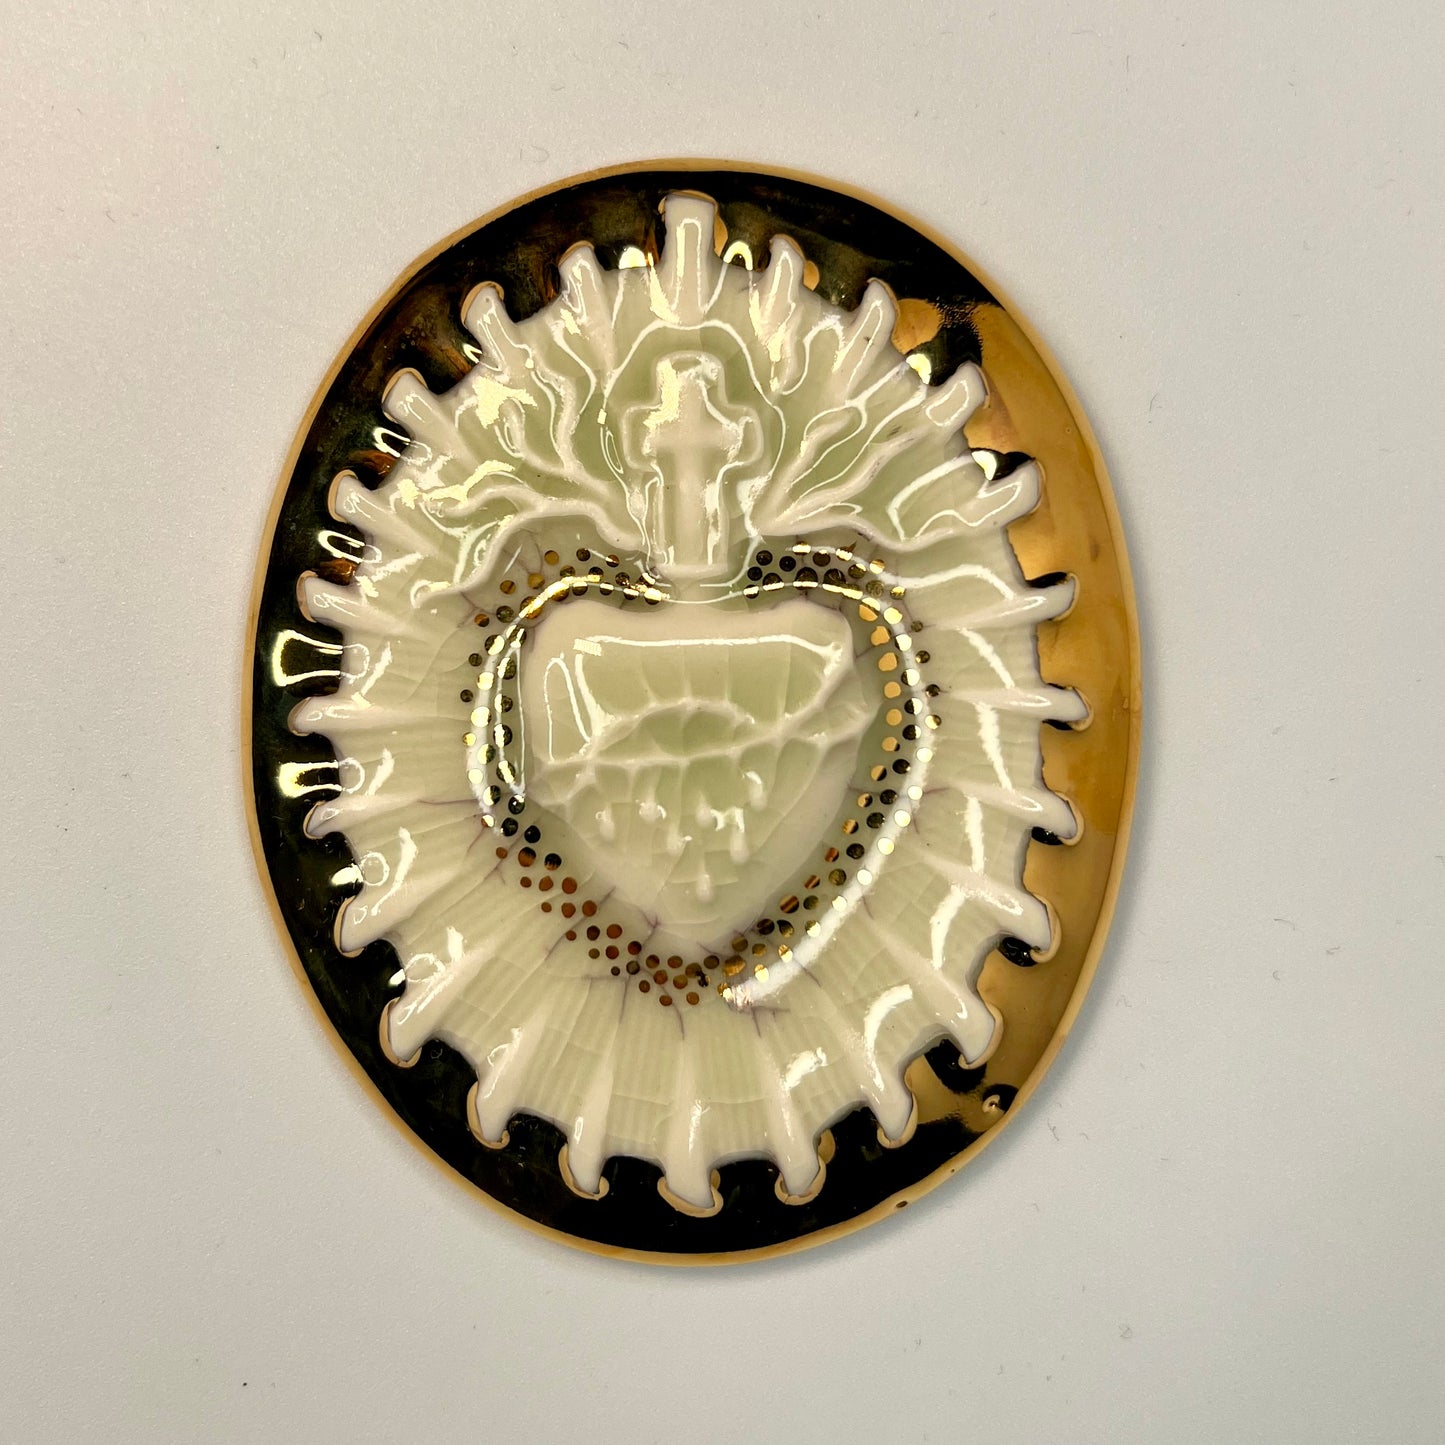 Product Image: Sacred Heart 9 - Hand crafted Porcelain Table Ornament. Bleeding Sacred Heart in thorns.